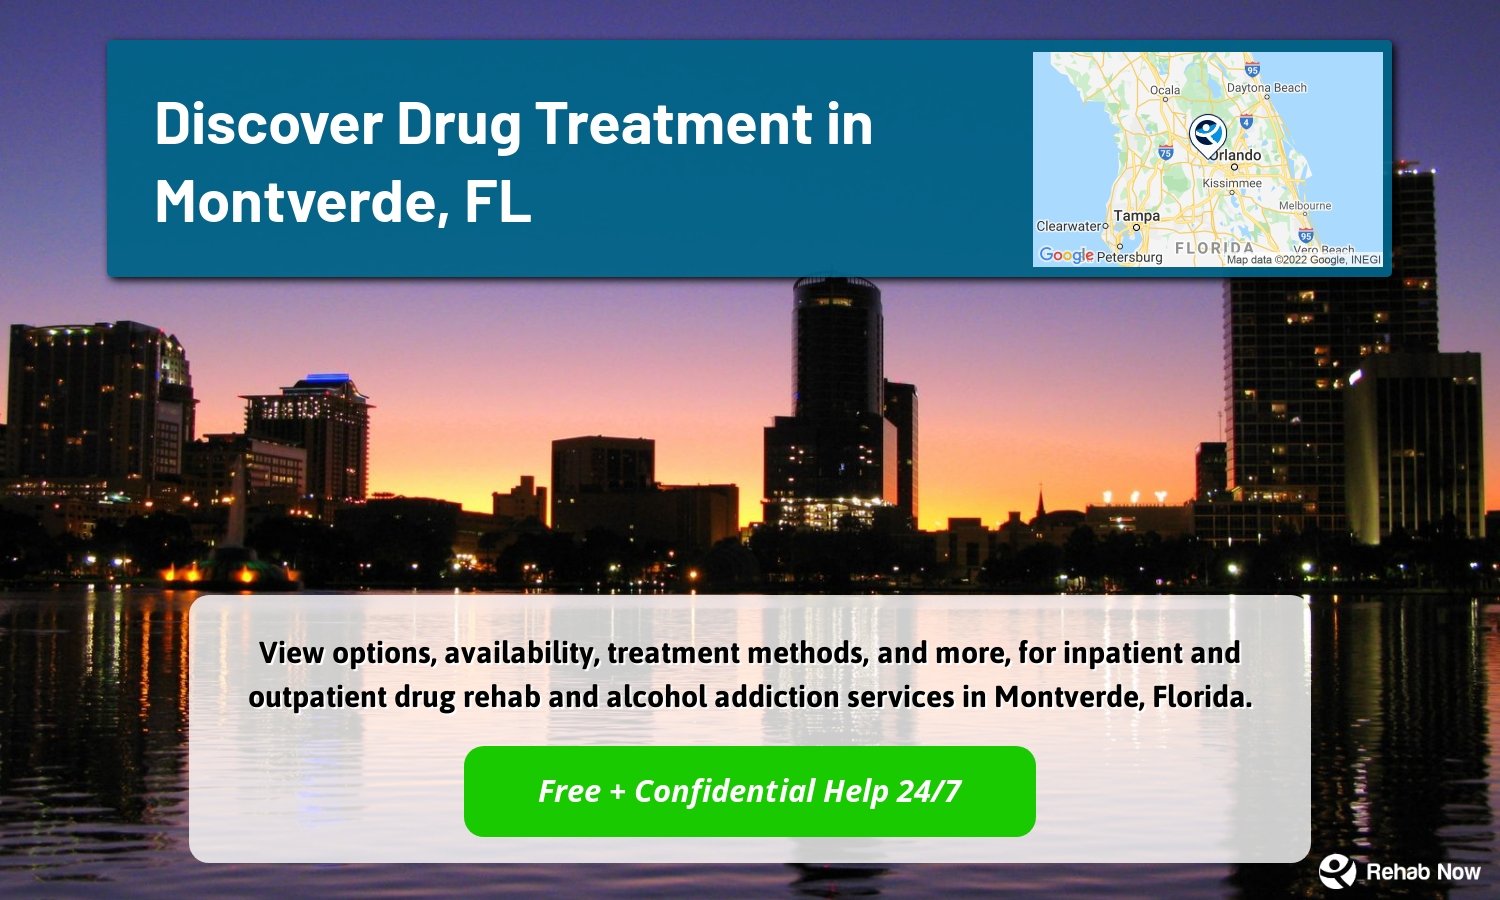 View options, availability, treatment methods, and more, for inpatient and outpatient drug rehab and alcohol addiction services in Montverde, Florida.